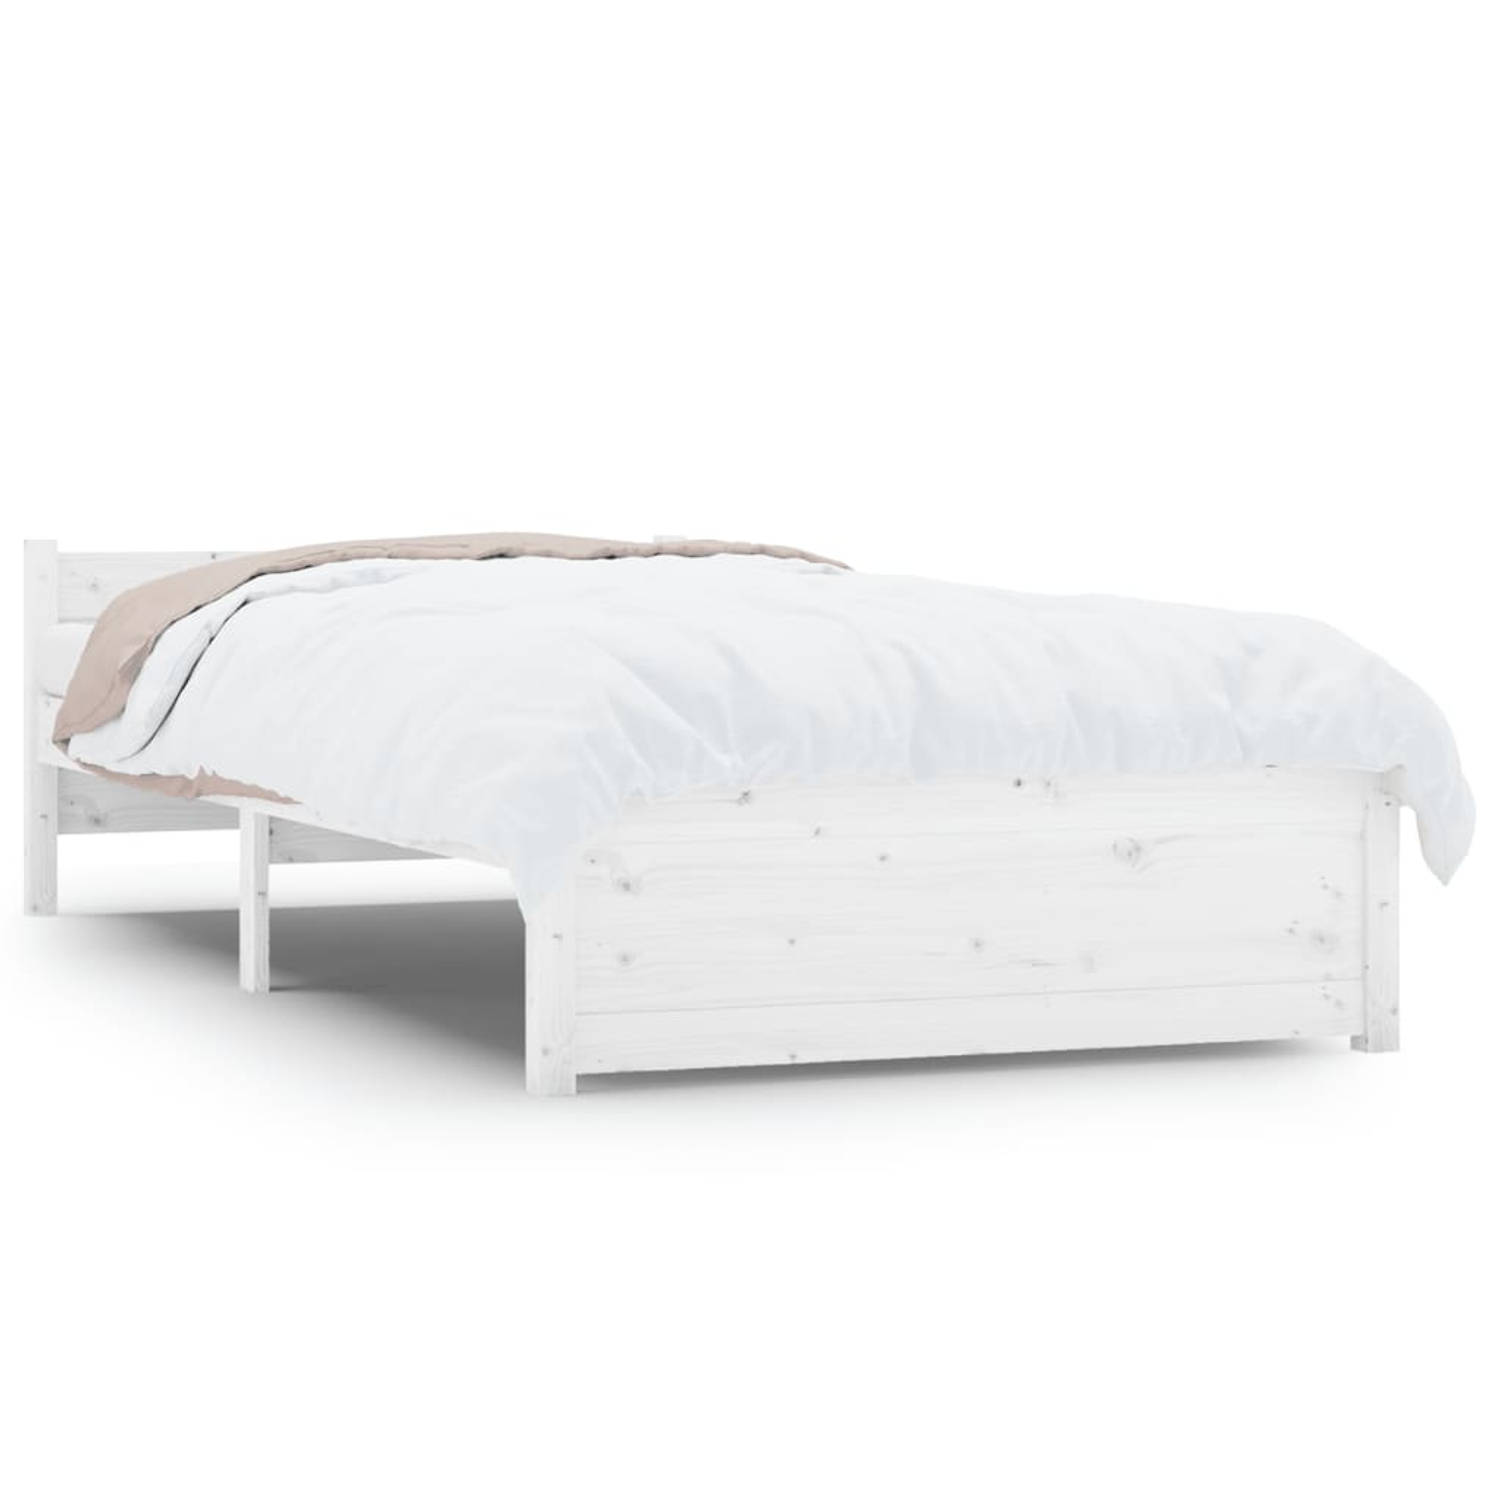 The Living Store Bedframe massief hout wit 75x190 cm 2FT6 Small Single - Bed